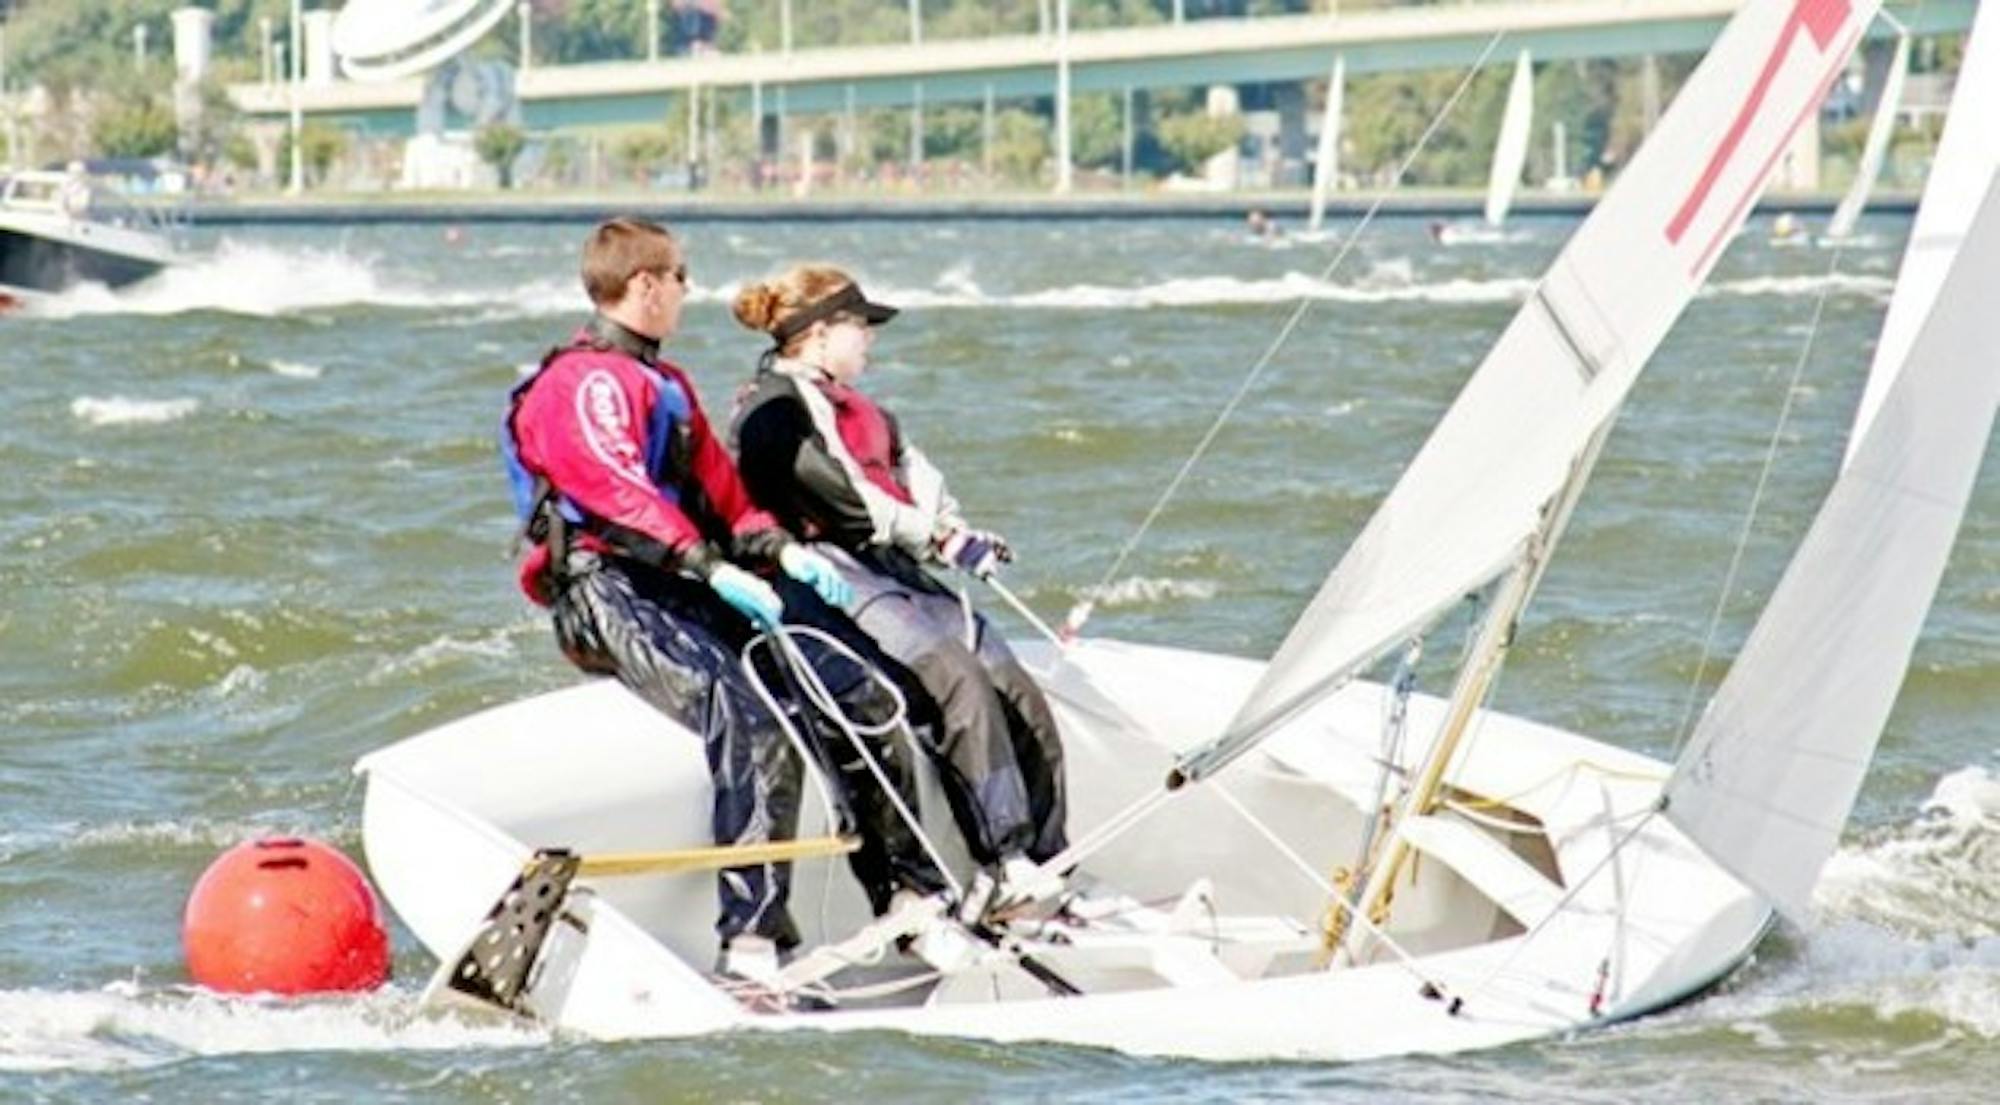 Racing against 18 of New England's top sailing teams, Dartmouth finished third at the New England Dingy Championship and secured a berth to nationals.